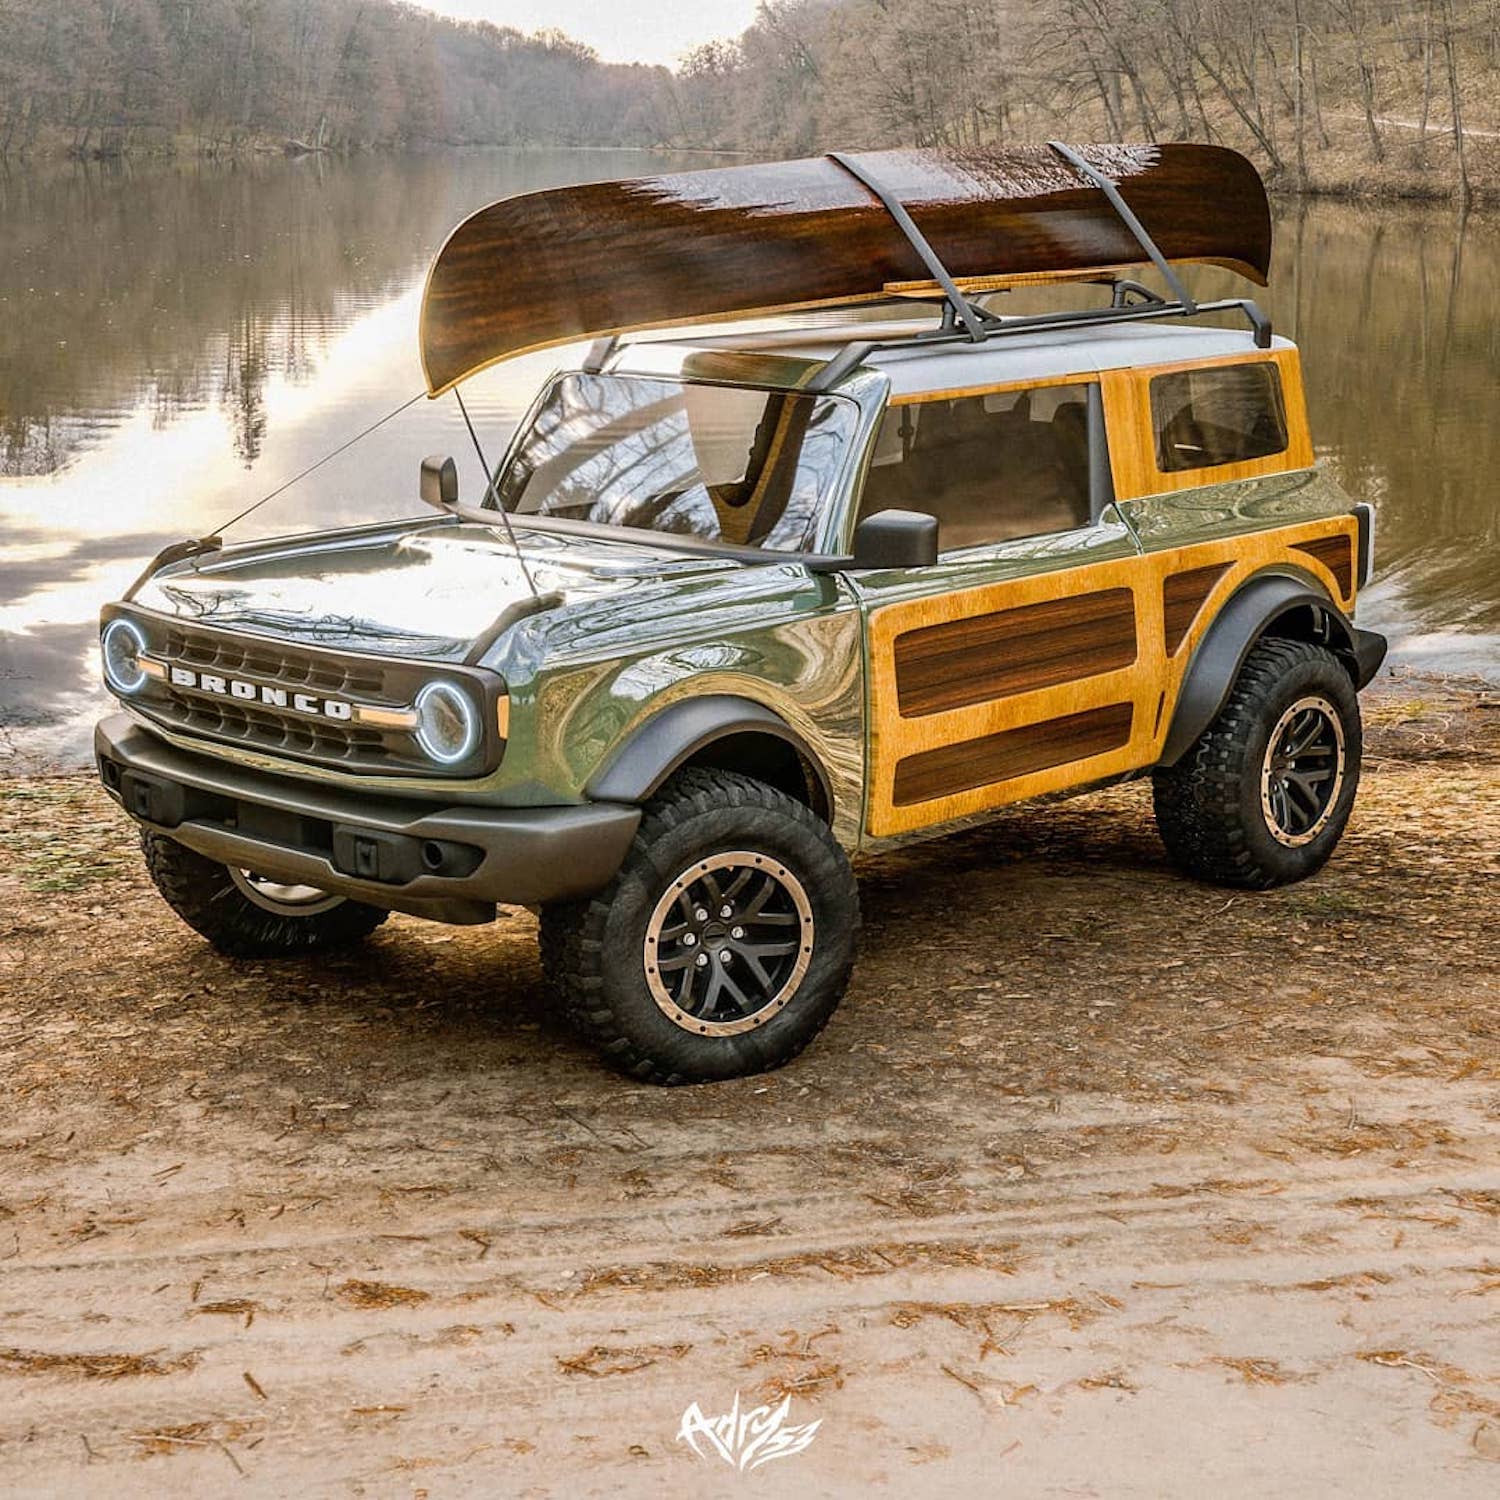 2021 Ford Bronco Gets Nostalgic Wooden Makeover In New Renders